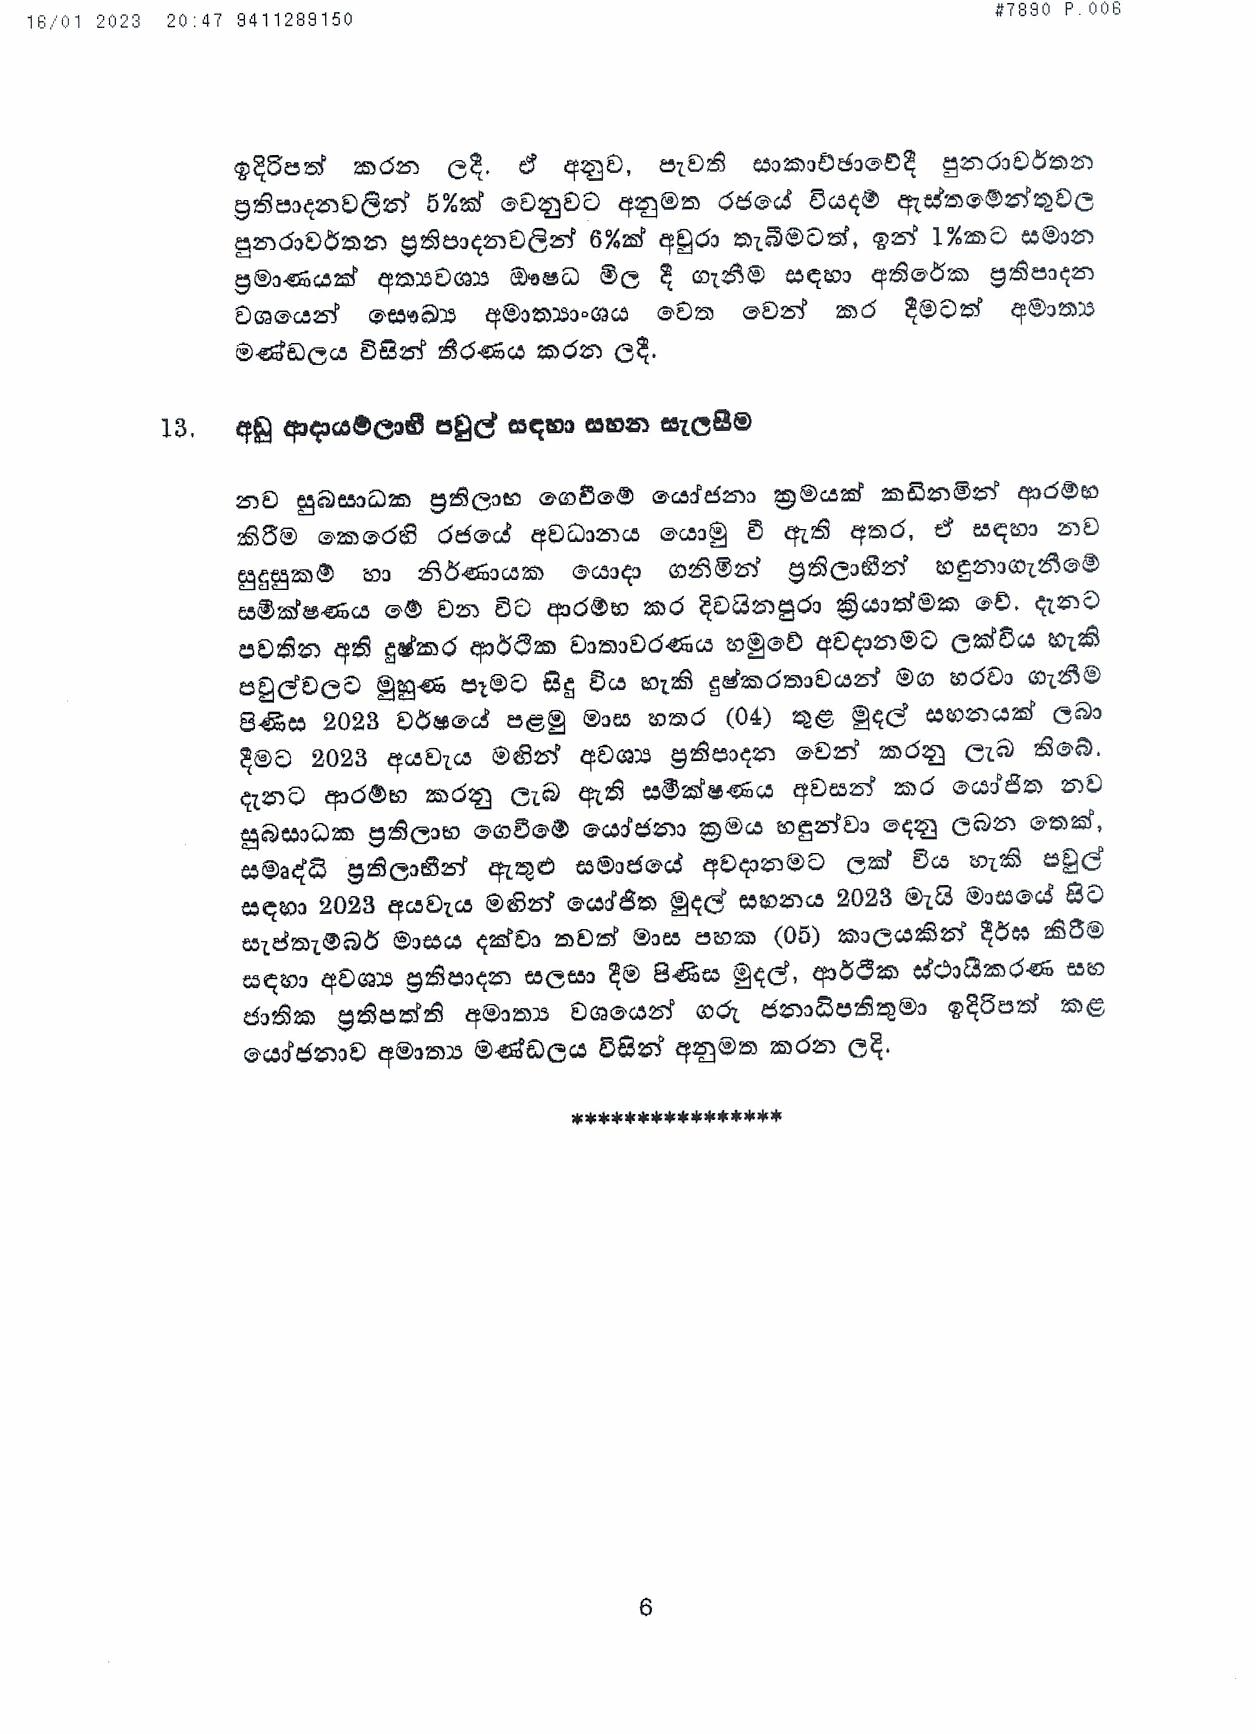 Cabinet Decision on 16.01.2023 page 006